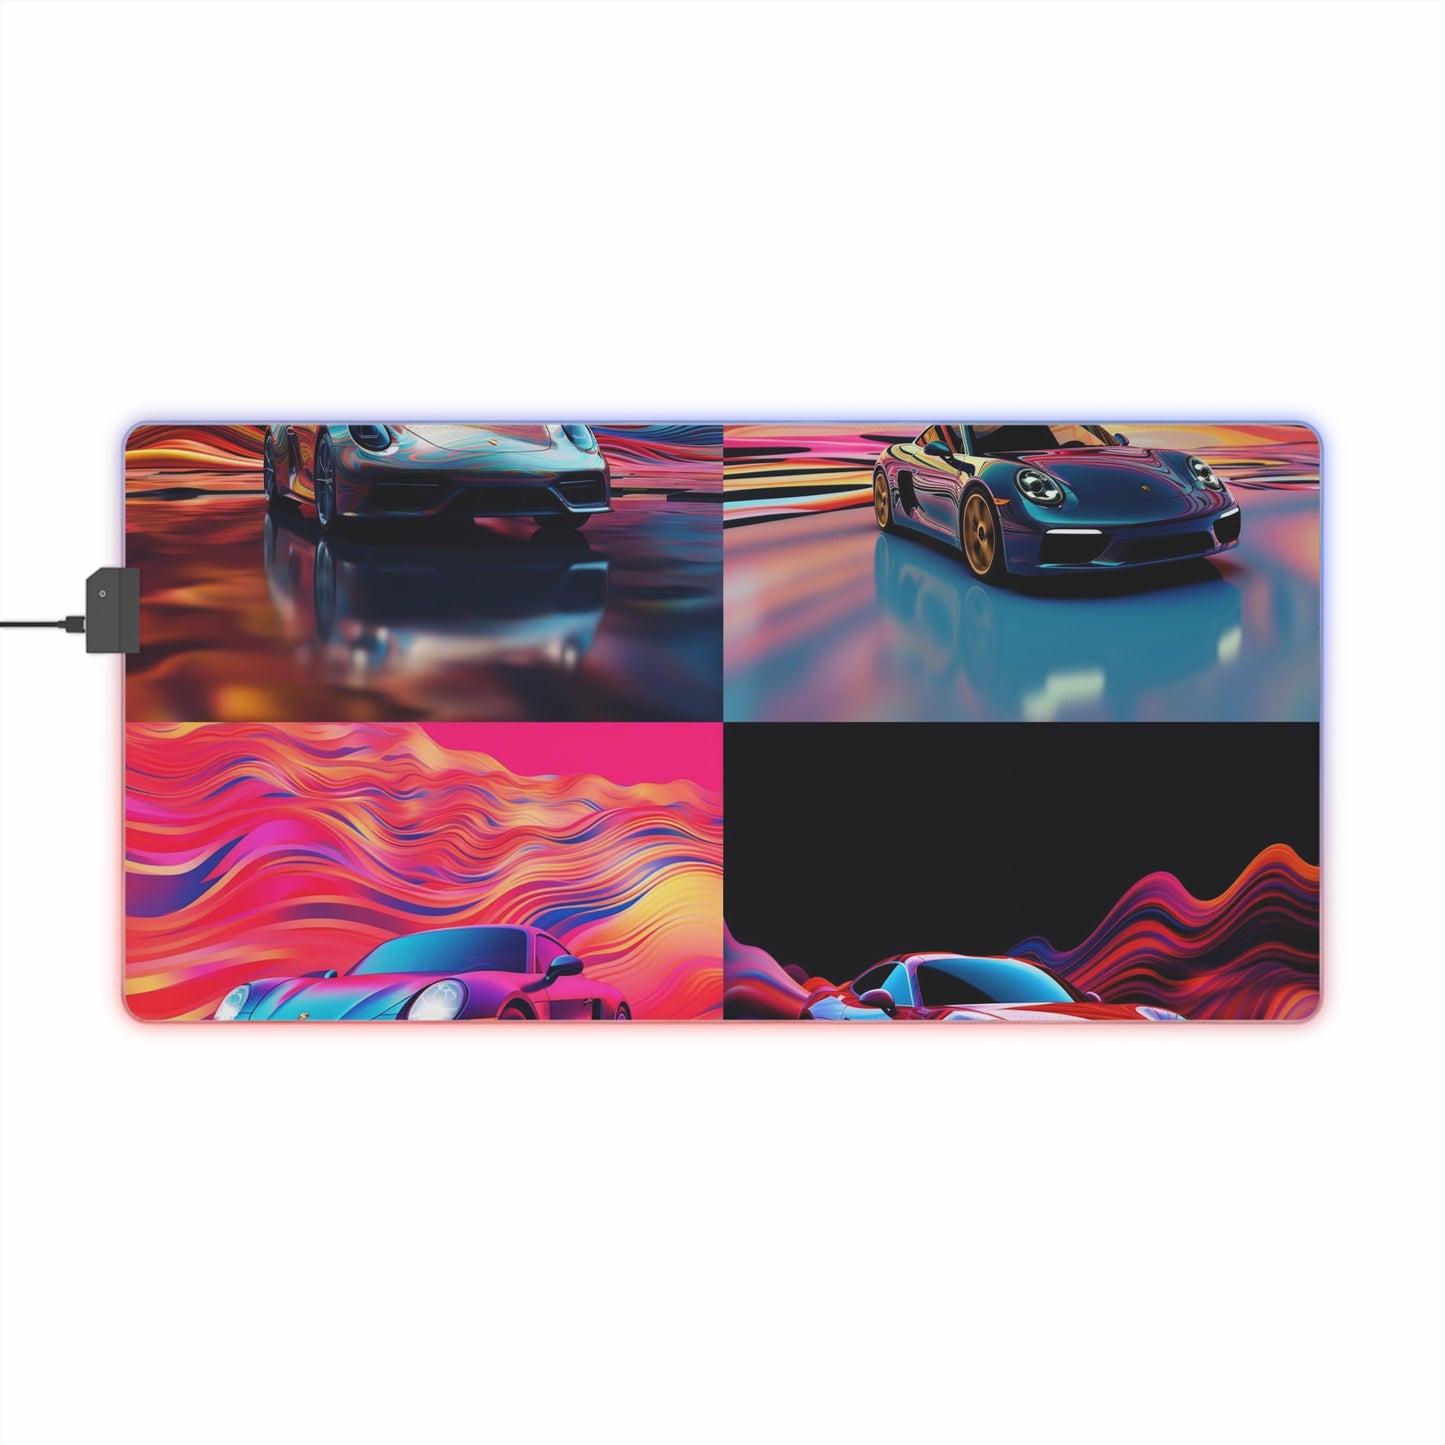 LED Gaming Mouse Pad Porsche Water Fusion 5